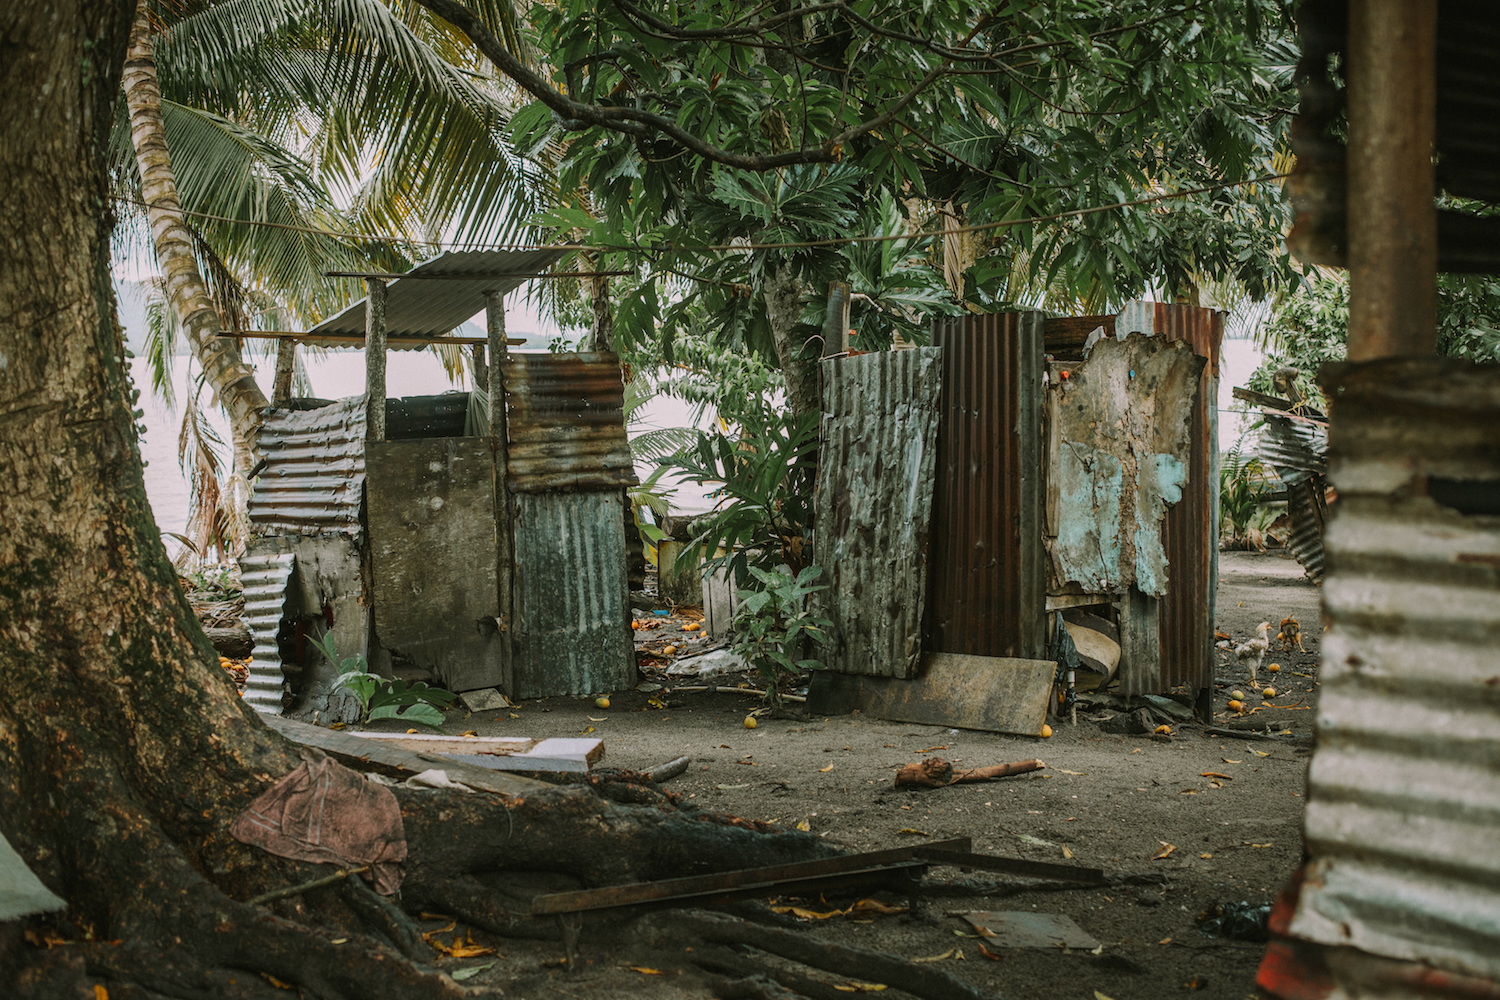  This photo shows the backyard of a local household in Gales Point, Belize. The structures pictured are an outhouse, shower, and a sliver of the shed that's used as a kitchen where the family cooks over an open fire. 